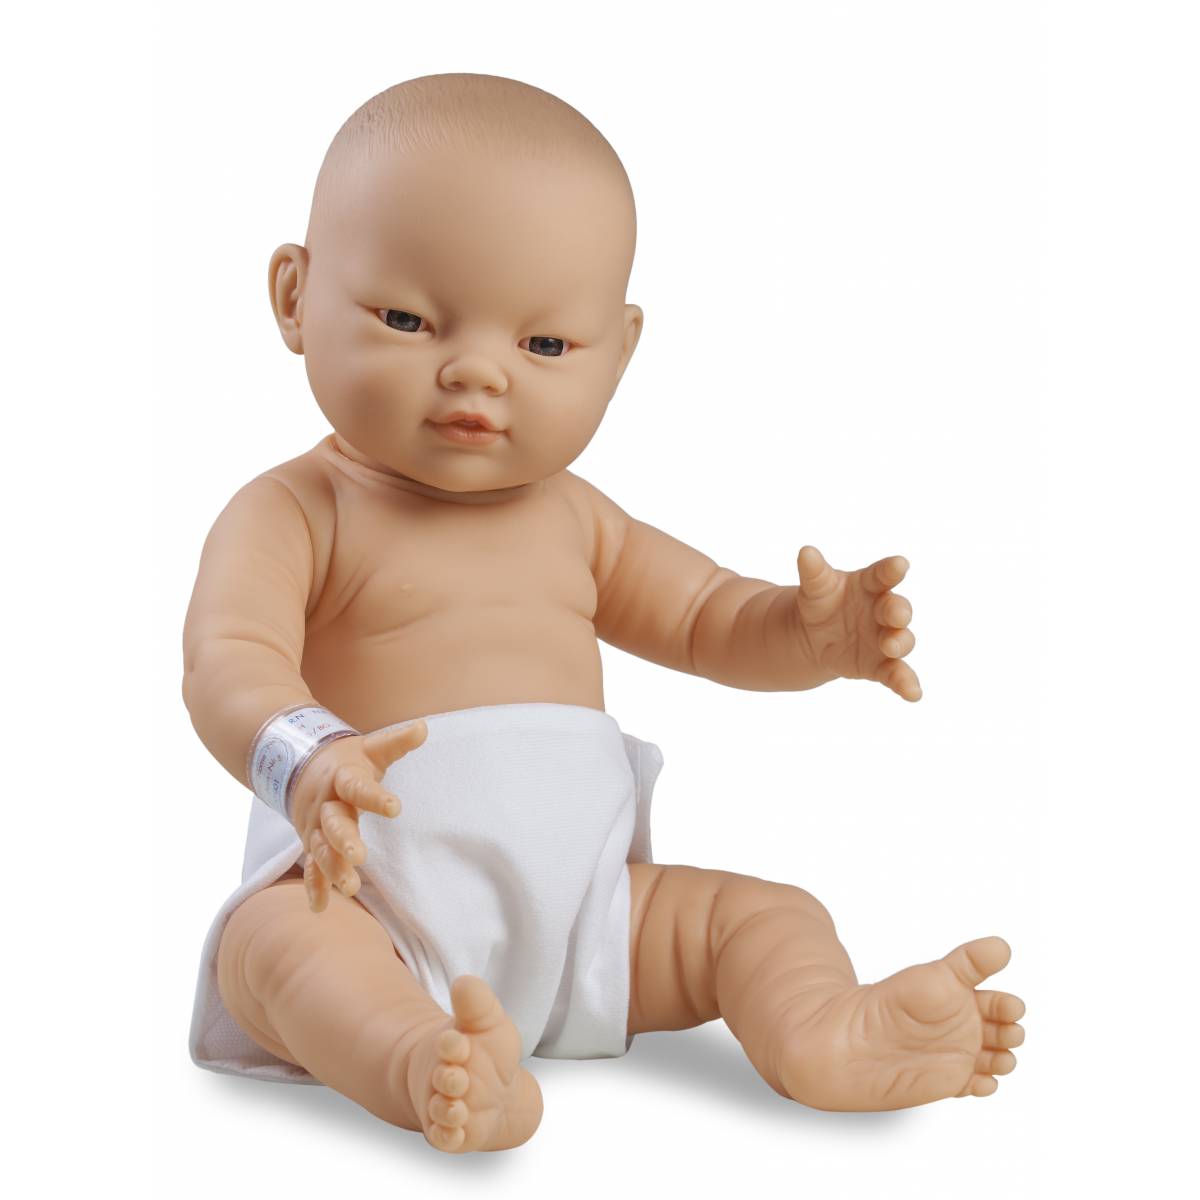 Female Baby Doll with Clothes